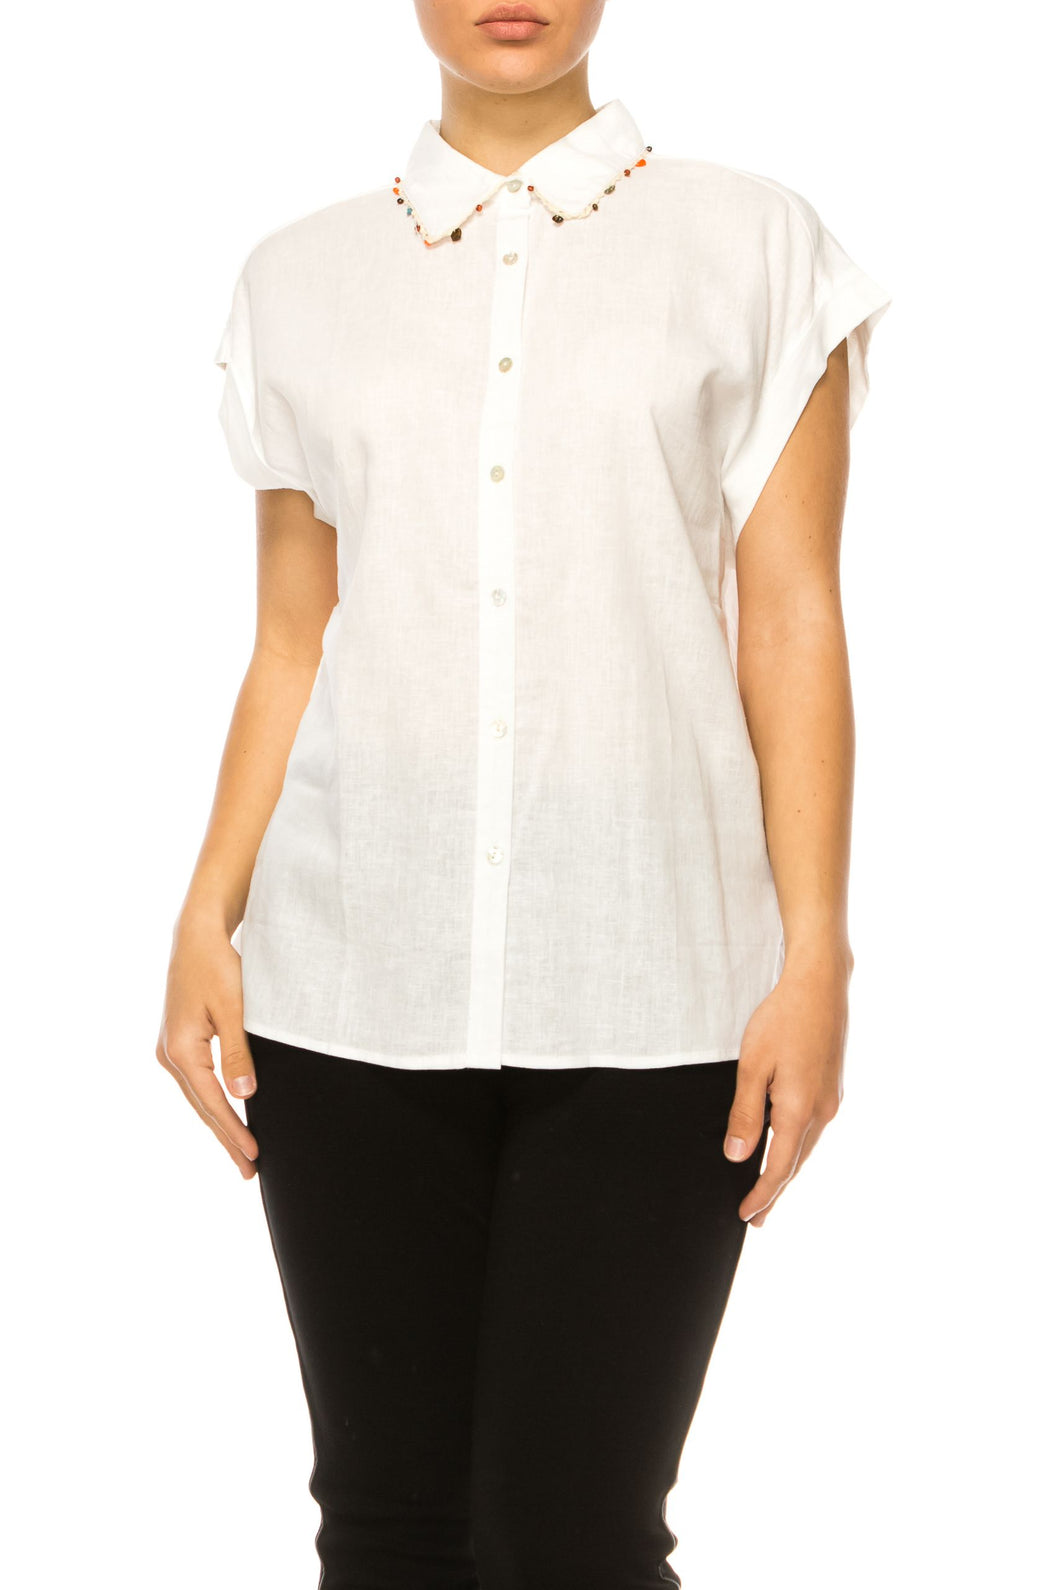 Hester & Orchard Beaded Collar Top